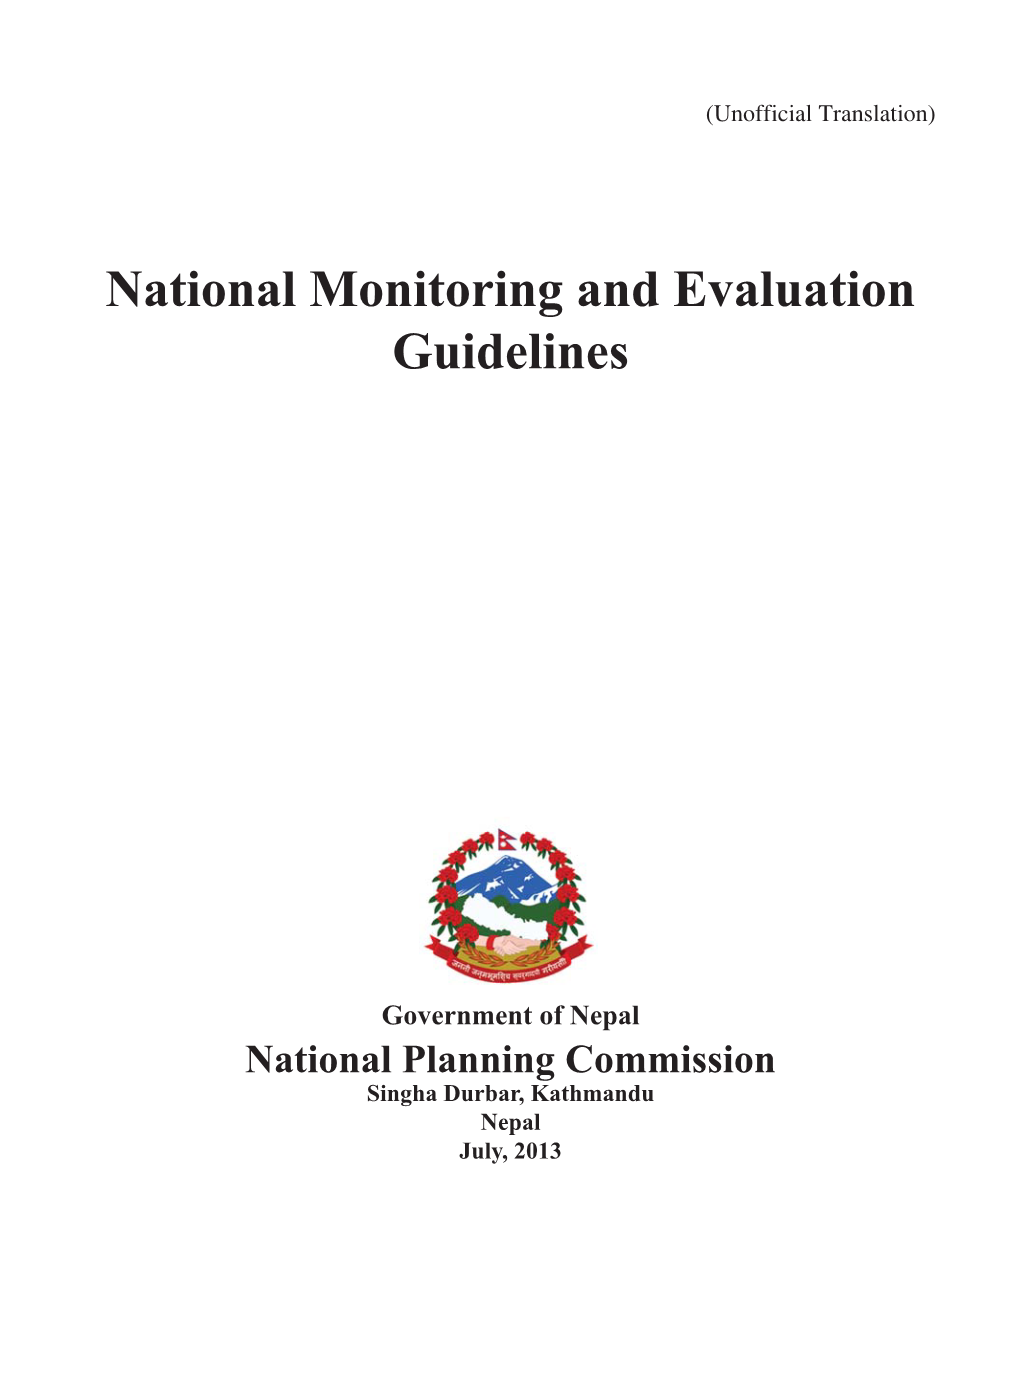 National Monitoring and Evaluation Guidelines